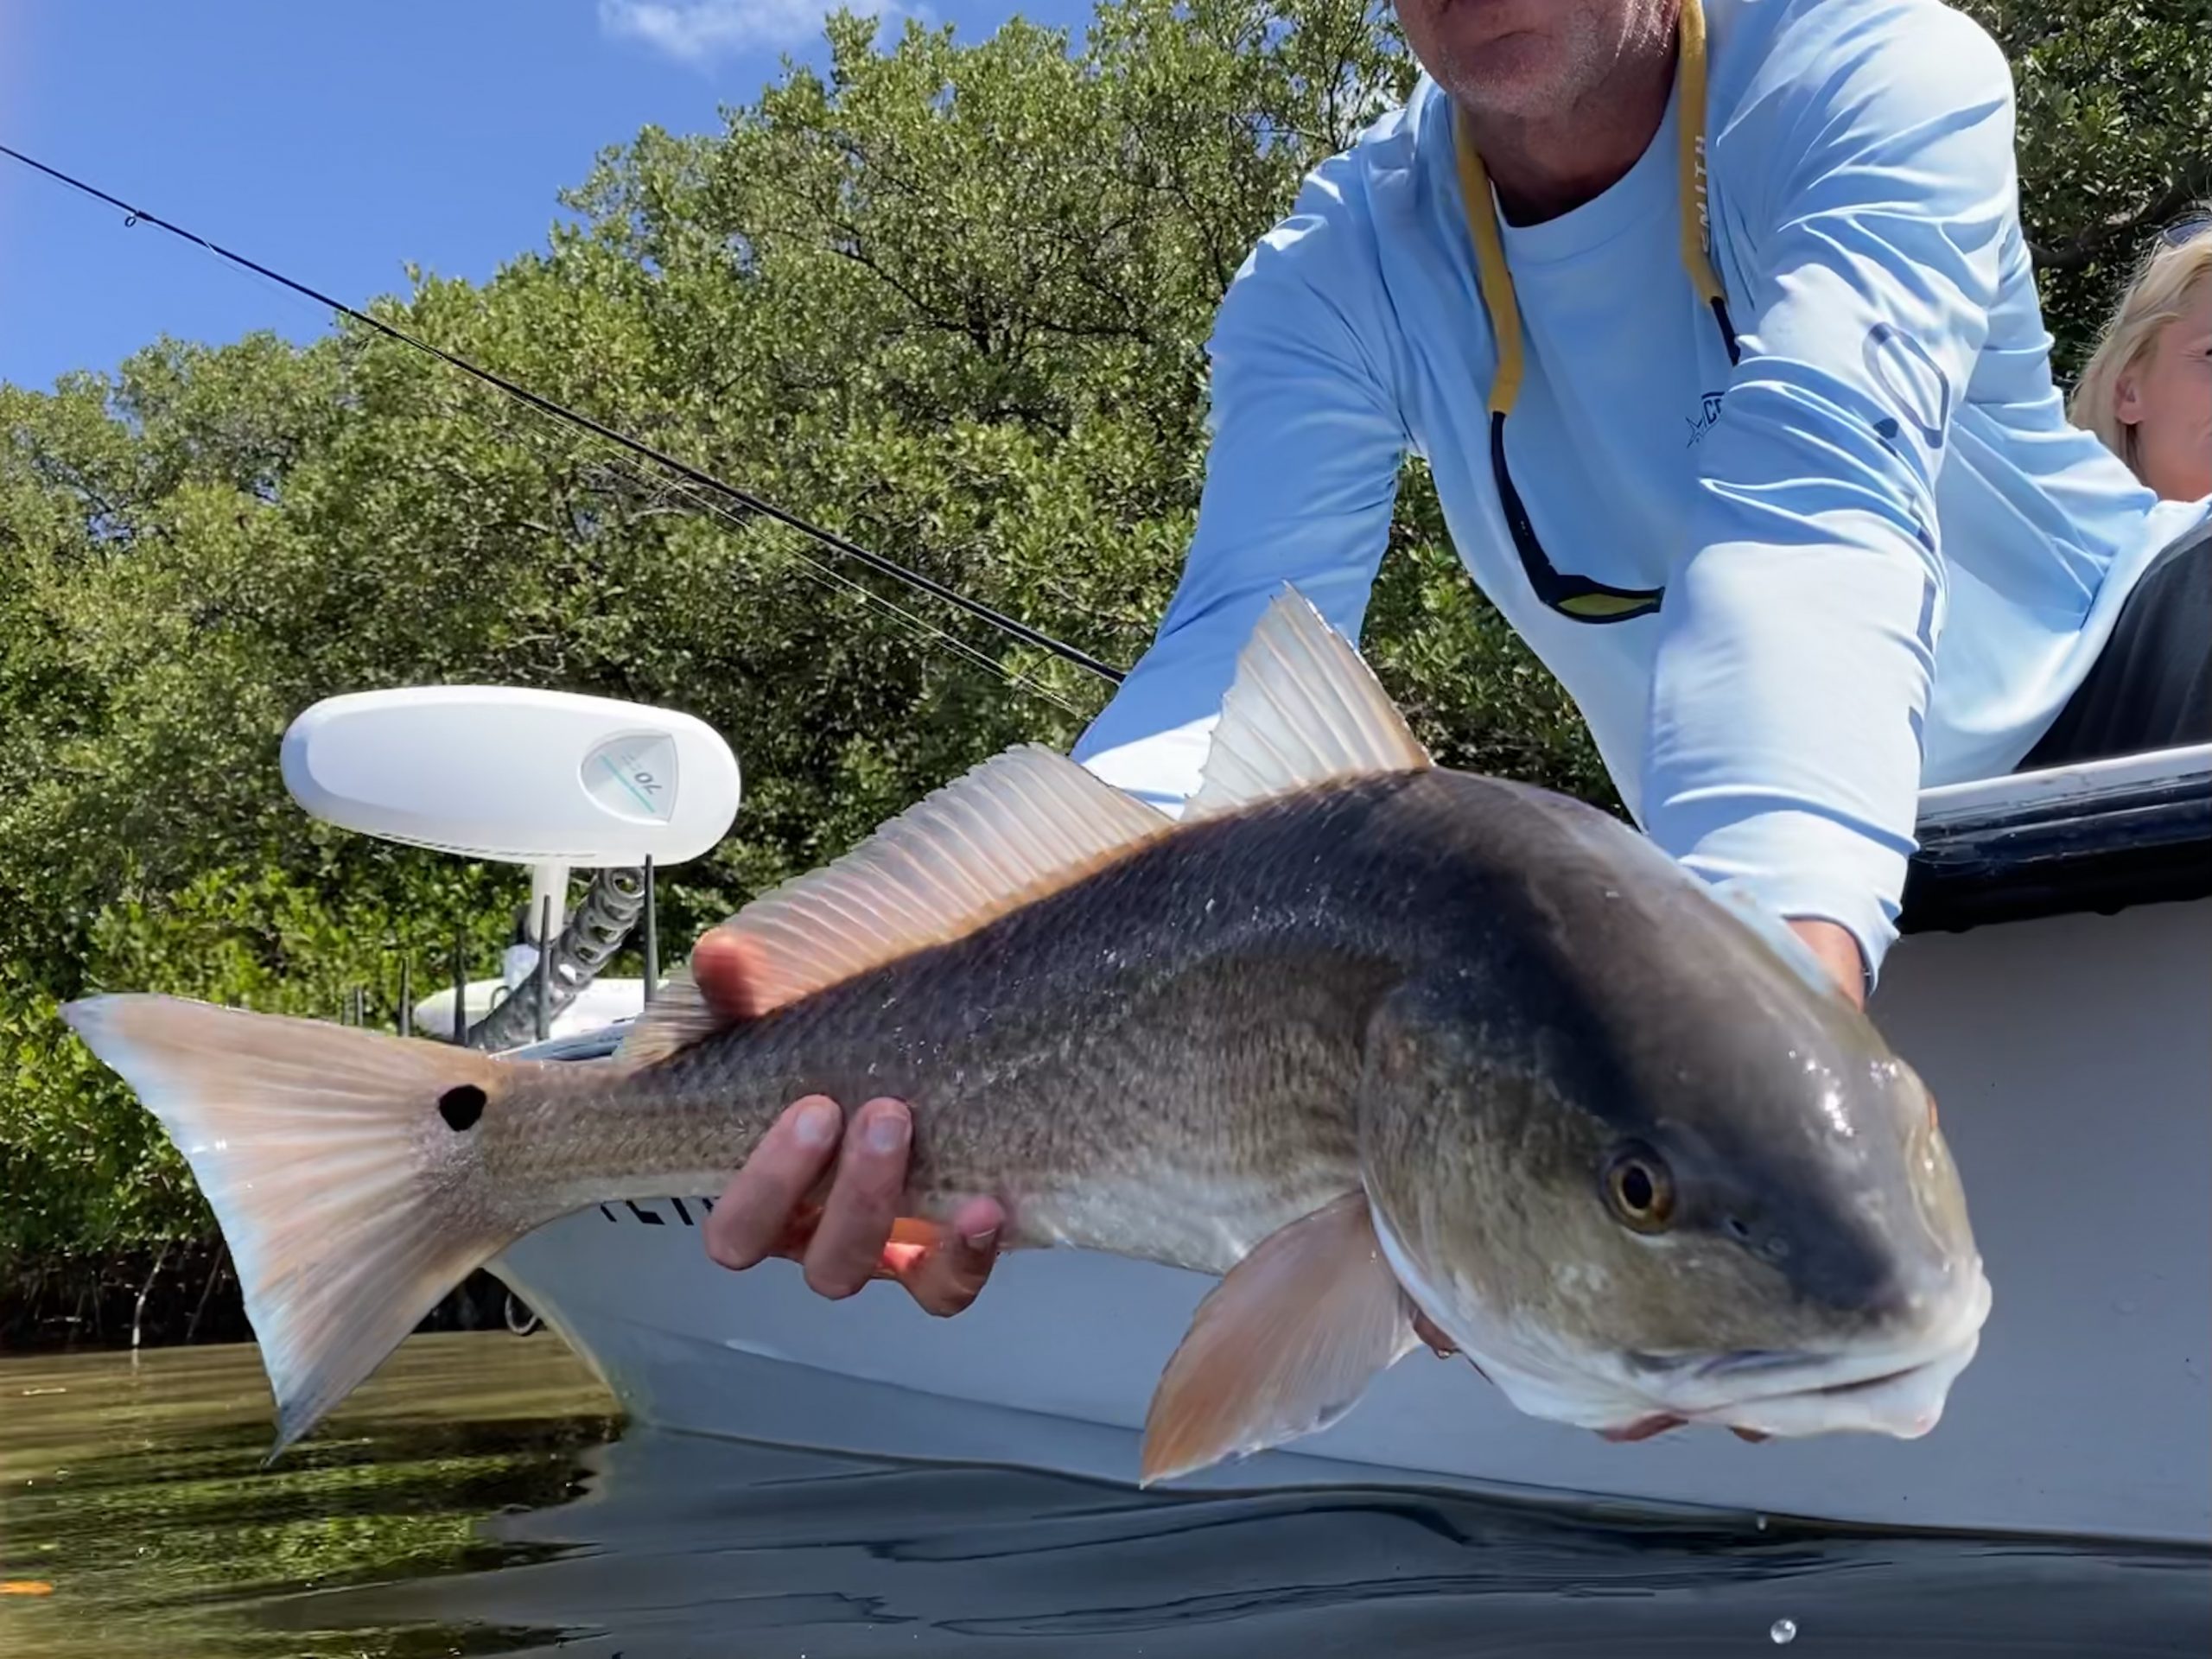 An angler releases a redfish caught in shallow water